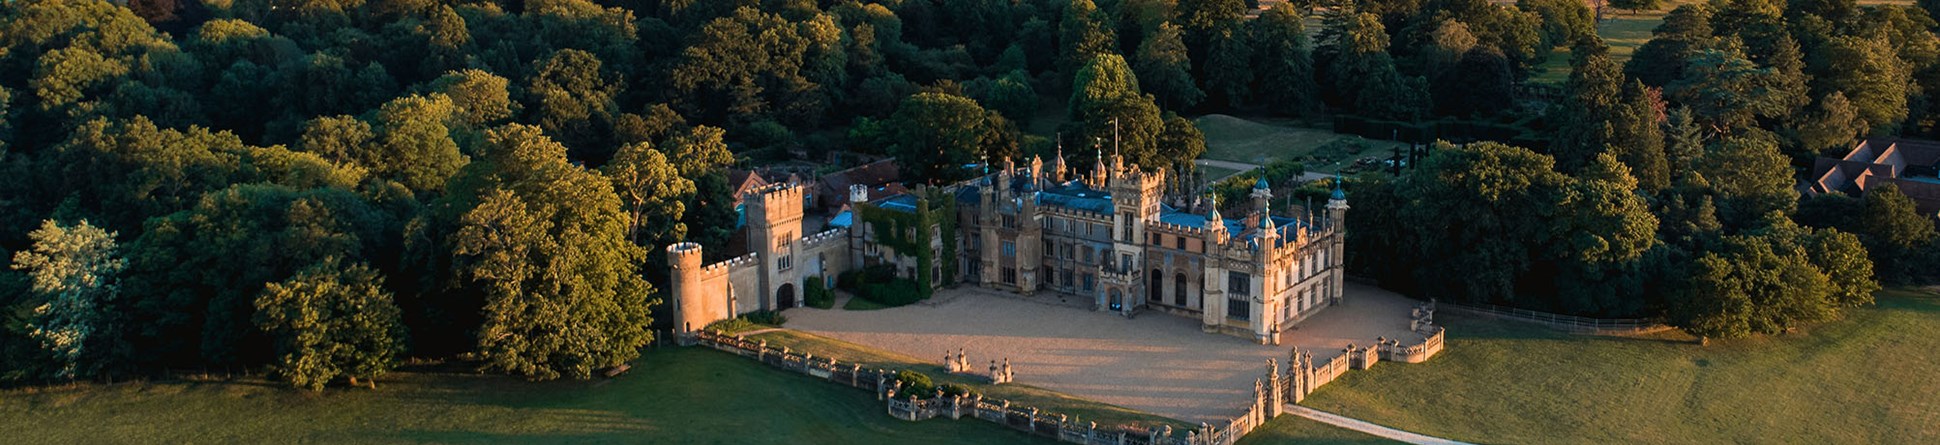 An aerial photograph shows the Knebworth House and Garden surrounded by trees with fields in the distance and a setting sunset.